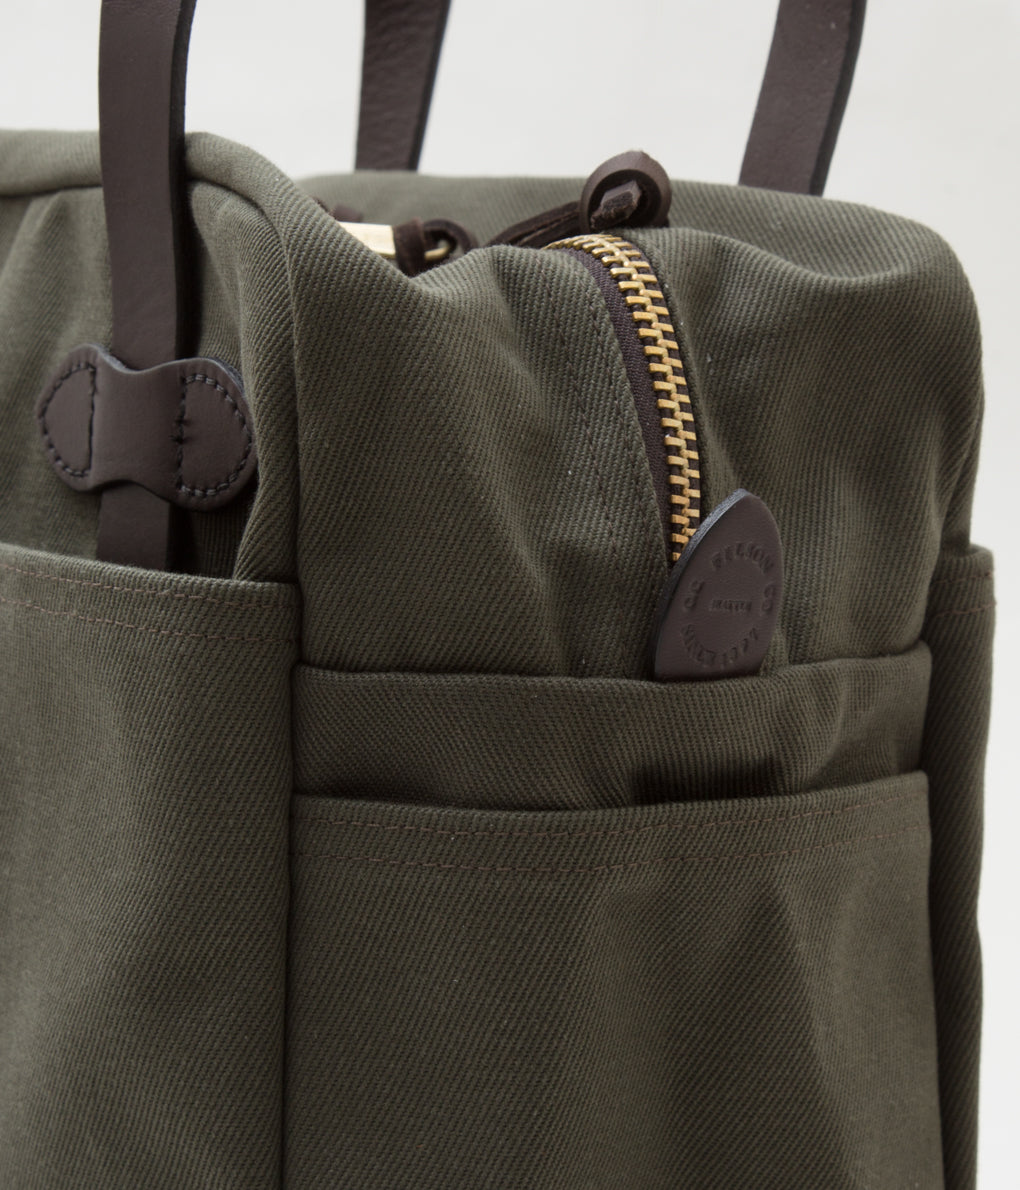 FILSON "TOTE BAG WITH ZIPPER" (OLIVE)